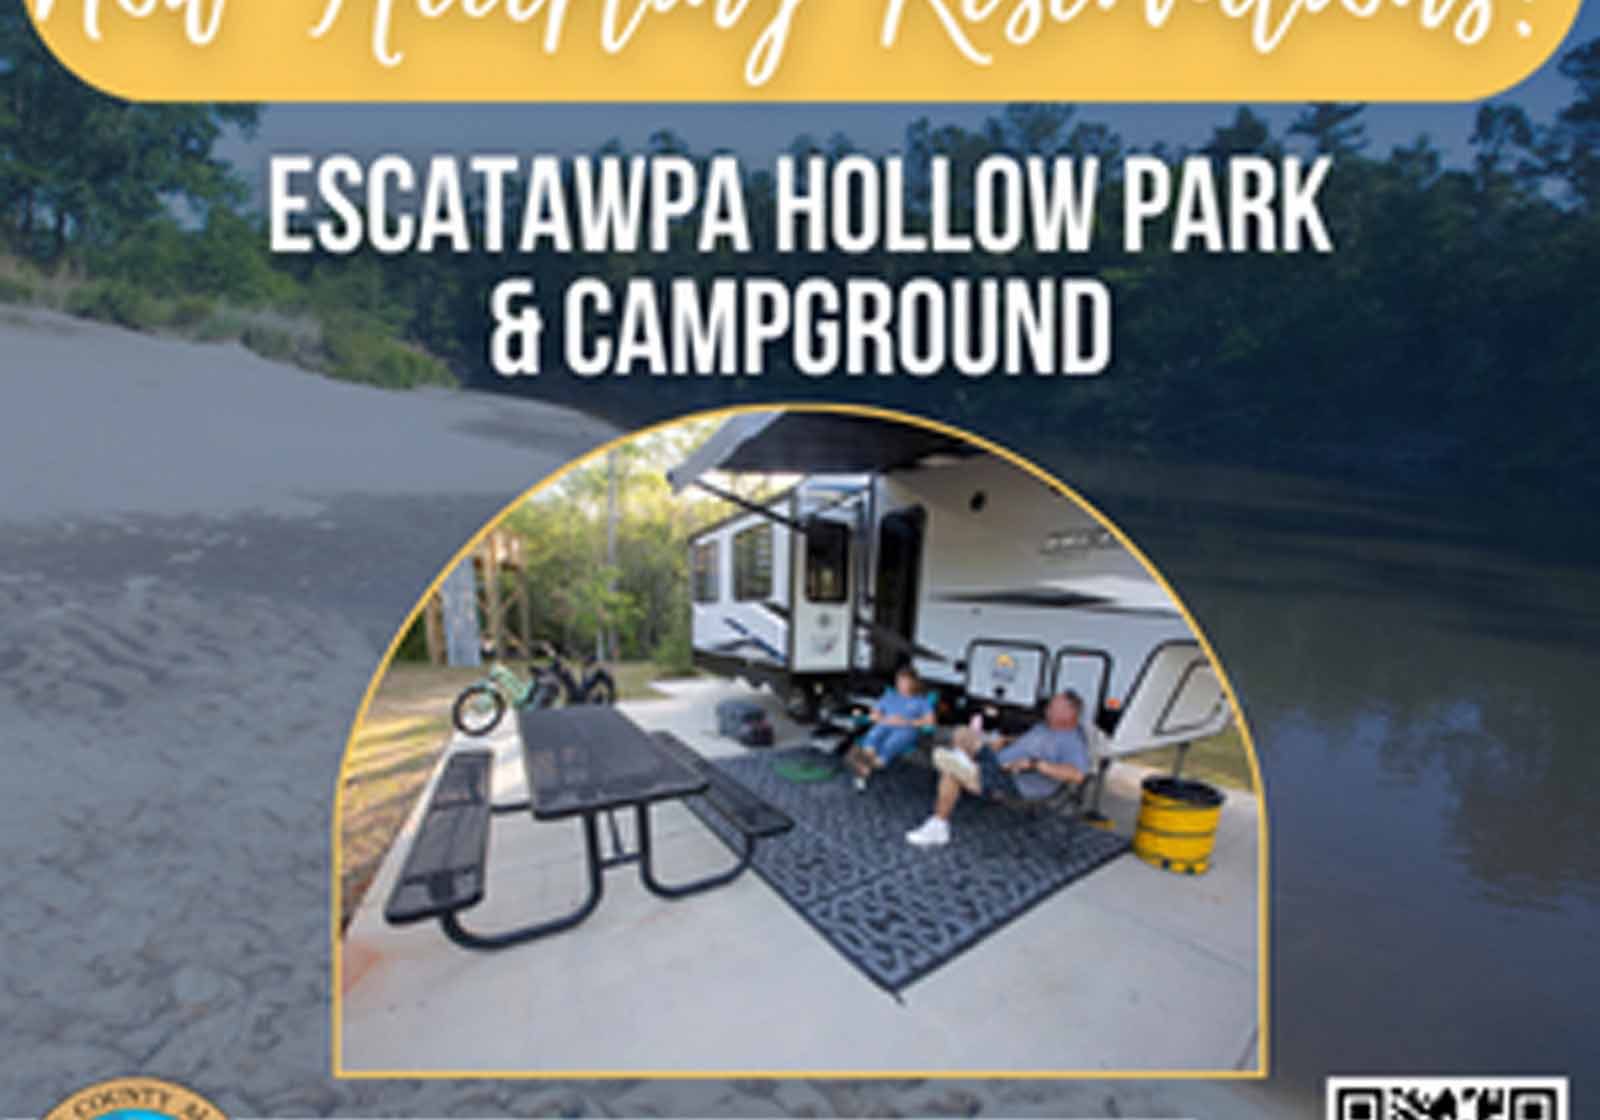 Escatawpa Hollow Park &amp; Campground Accepting Online Reservations